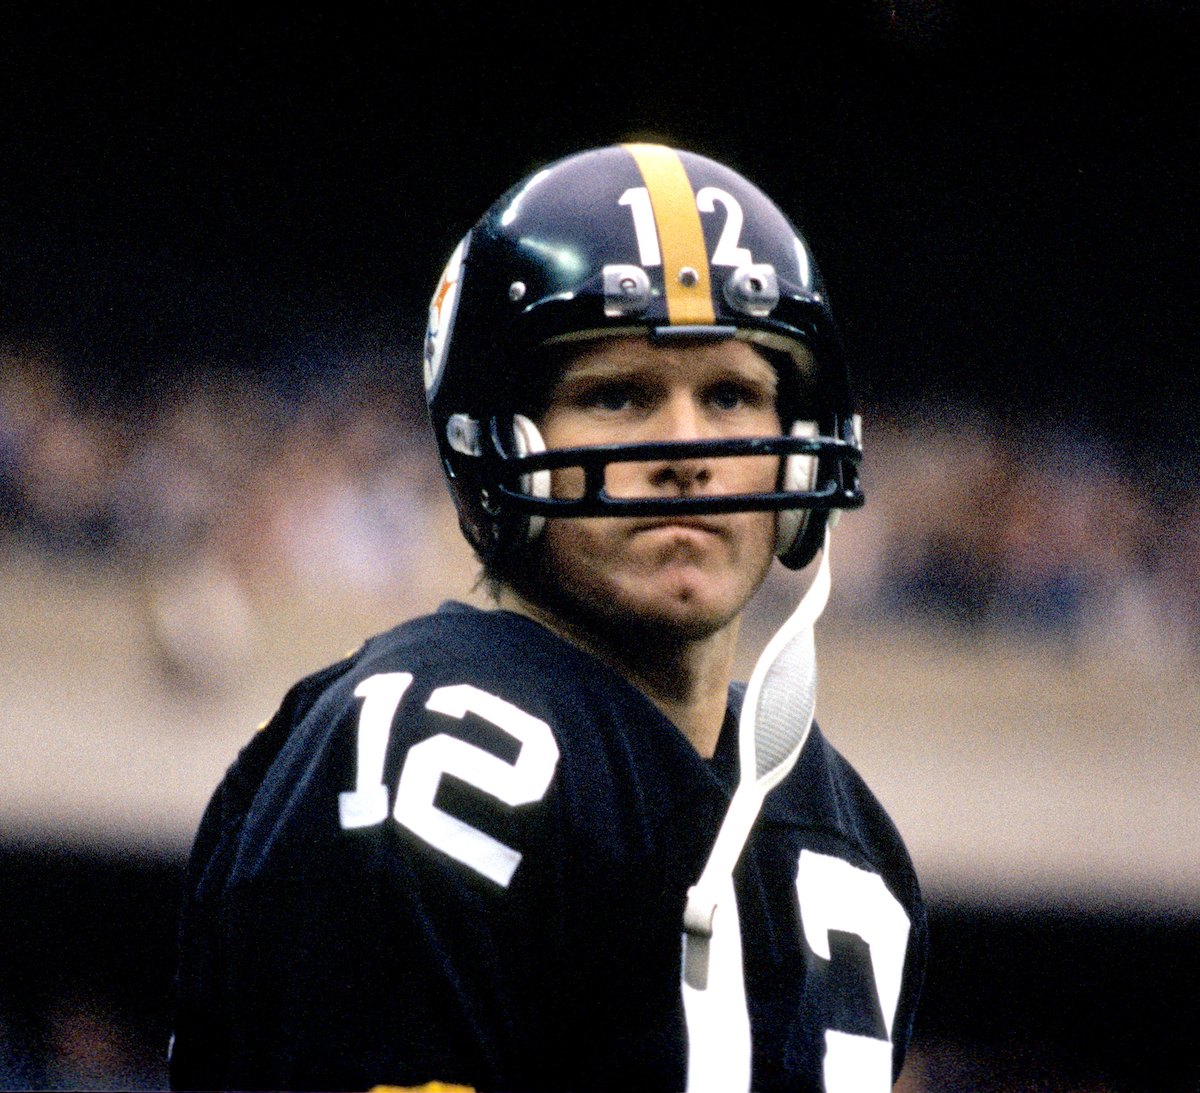 The Most Frustrating Part of Terry Bradshaw’s NFL Career: ‘This Isn’t Nuclear Physics, It’s a Game’